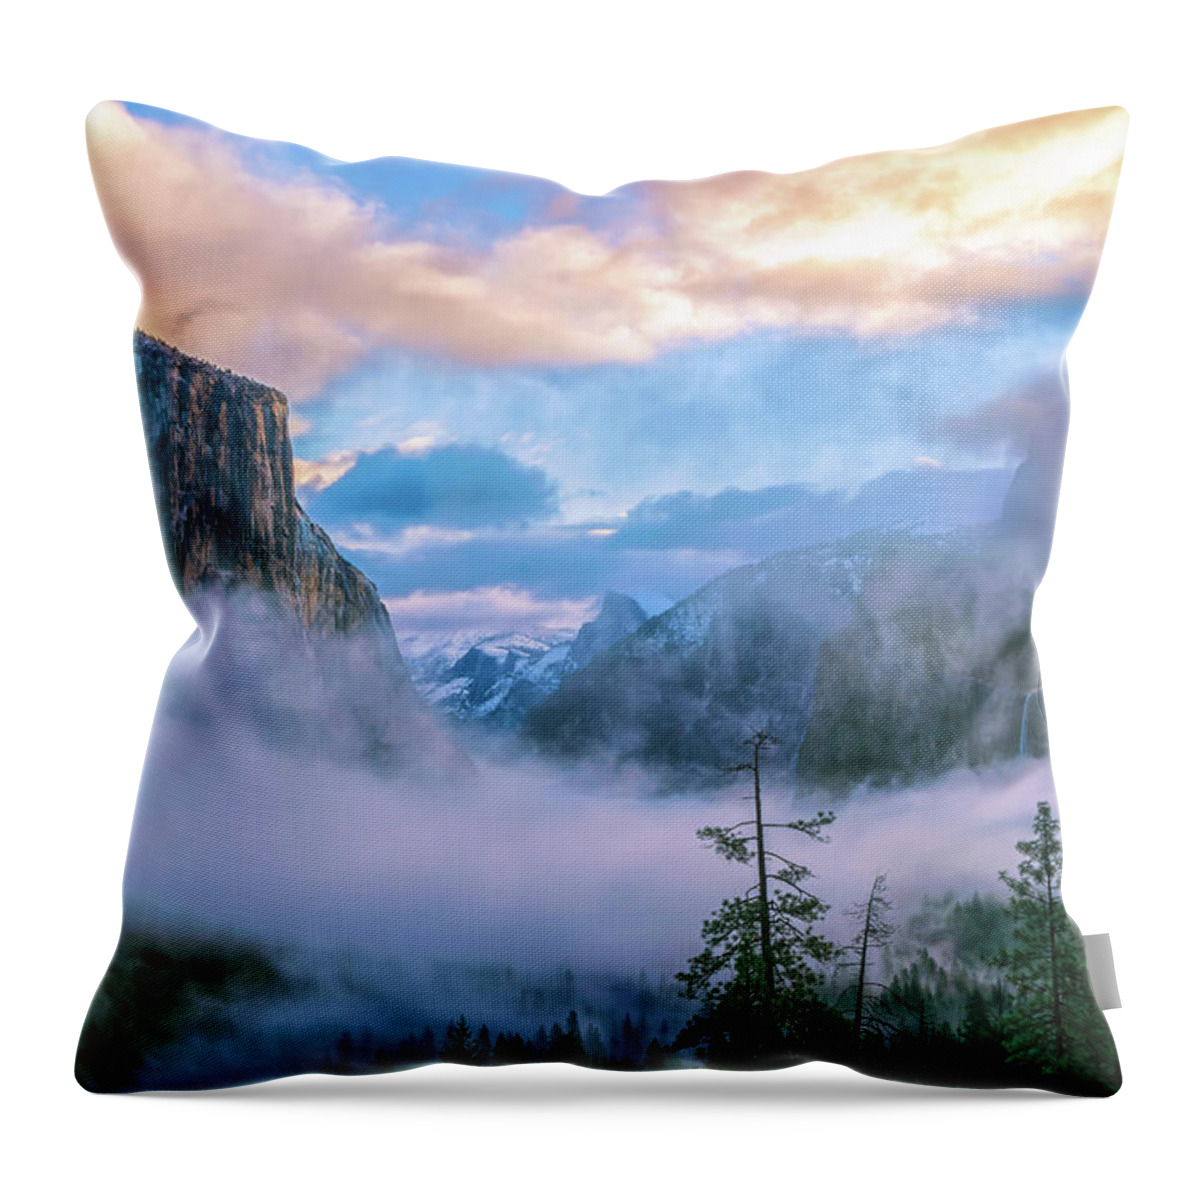 Yosemite National Park Throw Pillow featuring the photograph Circle Of Life by Jonathan Nguyen